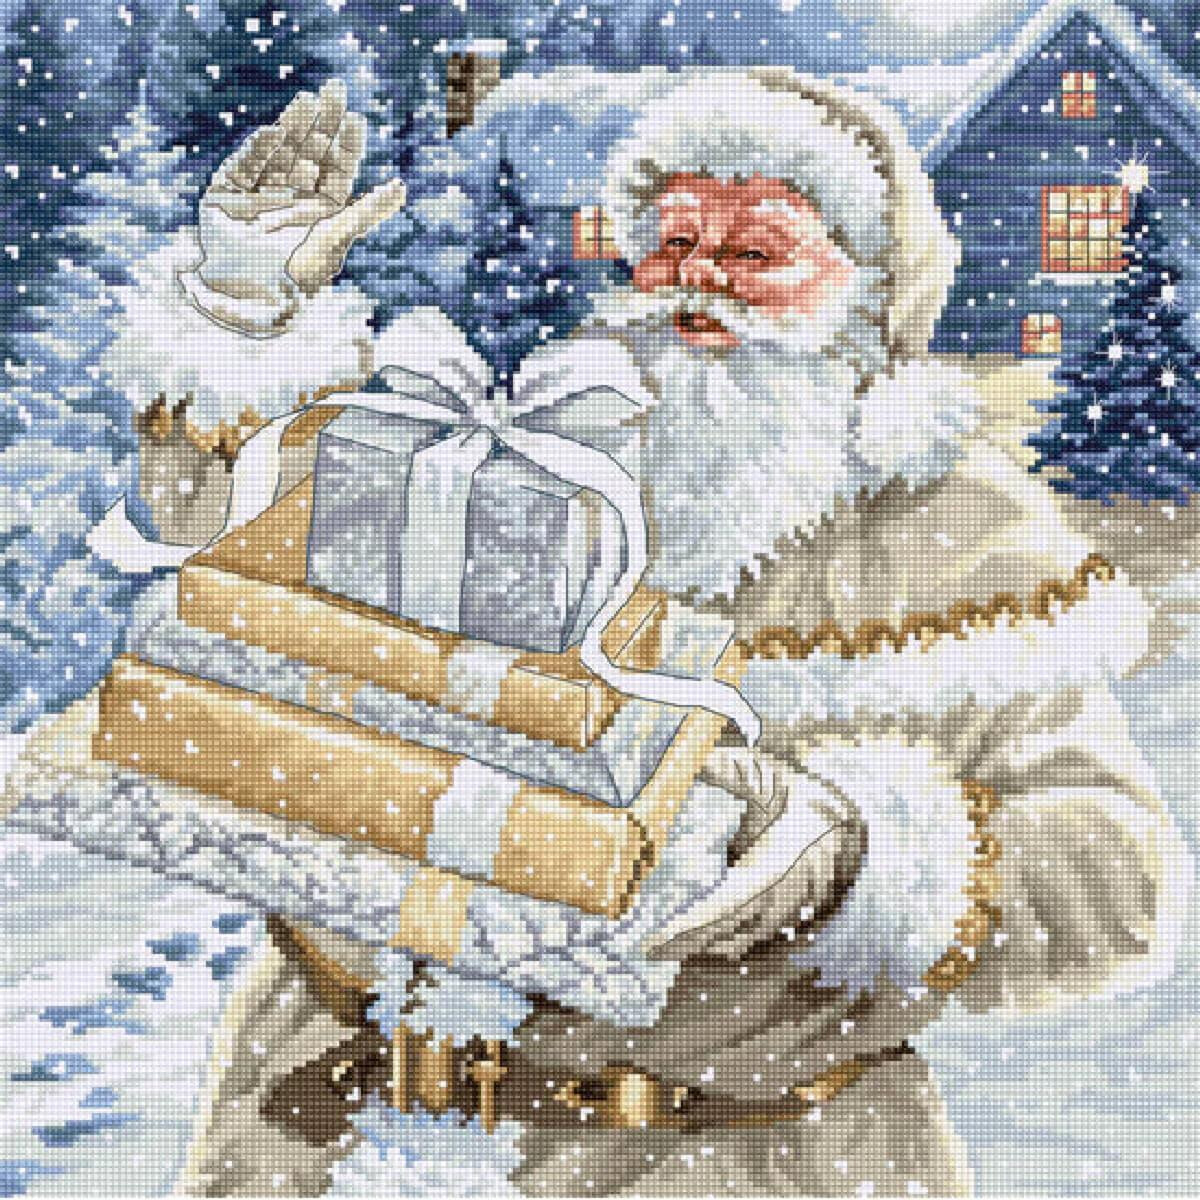 A digitally rendered image of Santa Claus holding three...